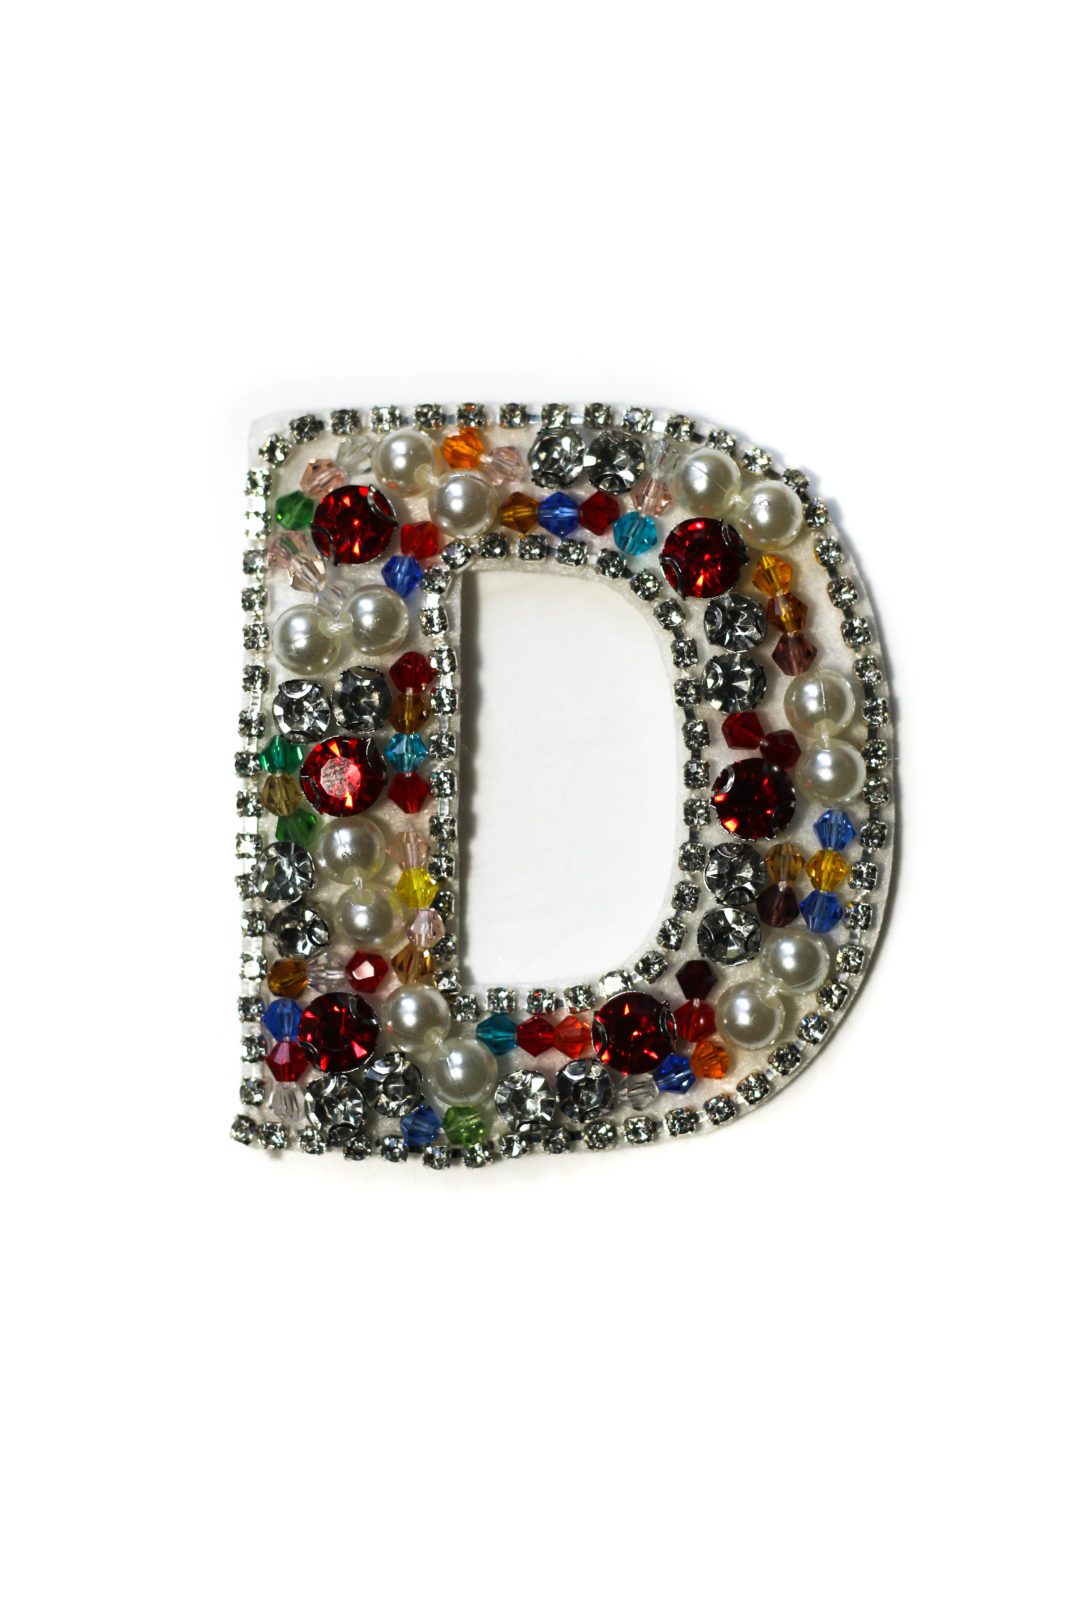 Letter D rhinestone beaded patches